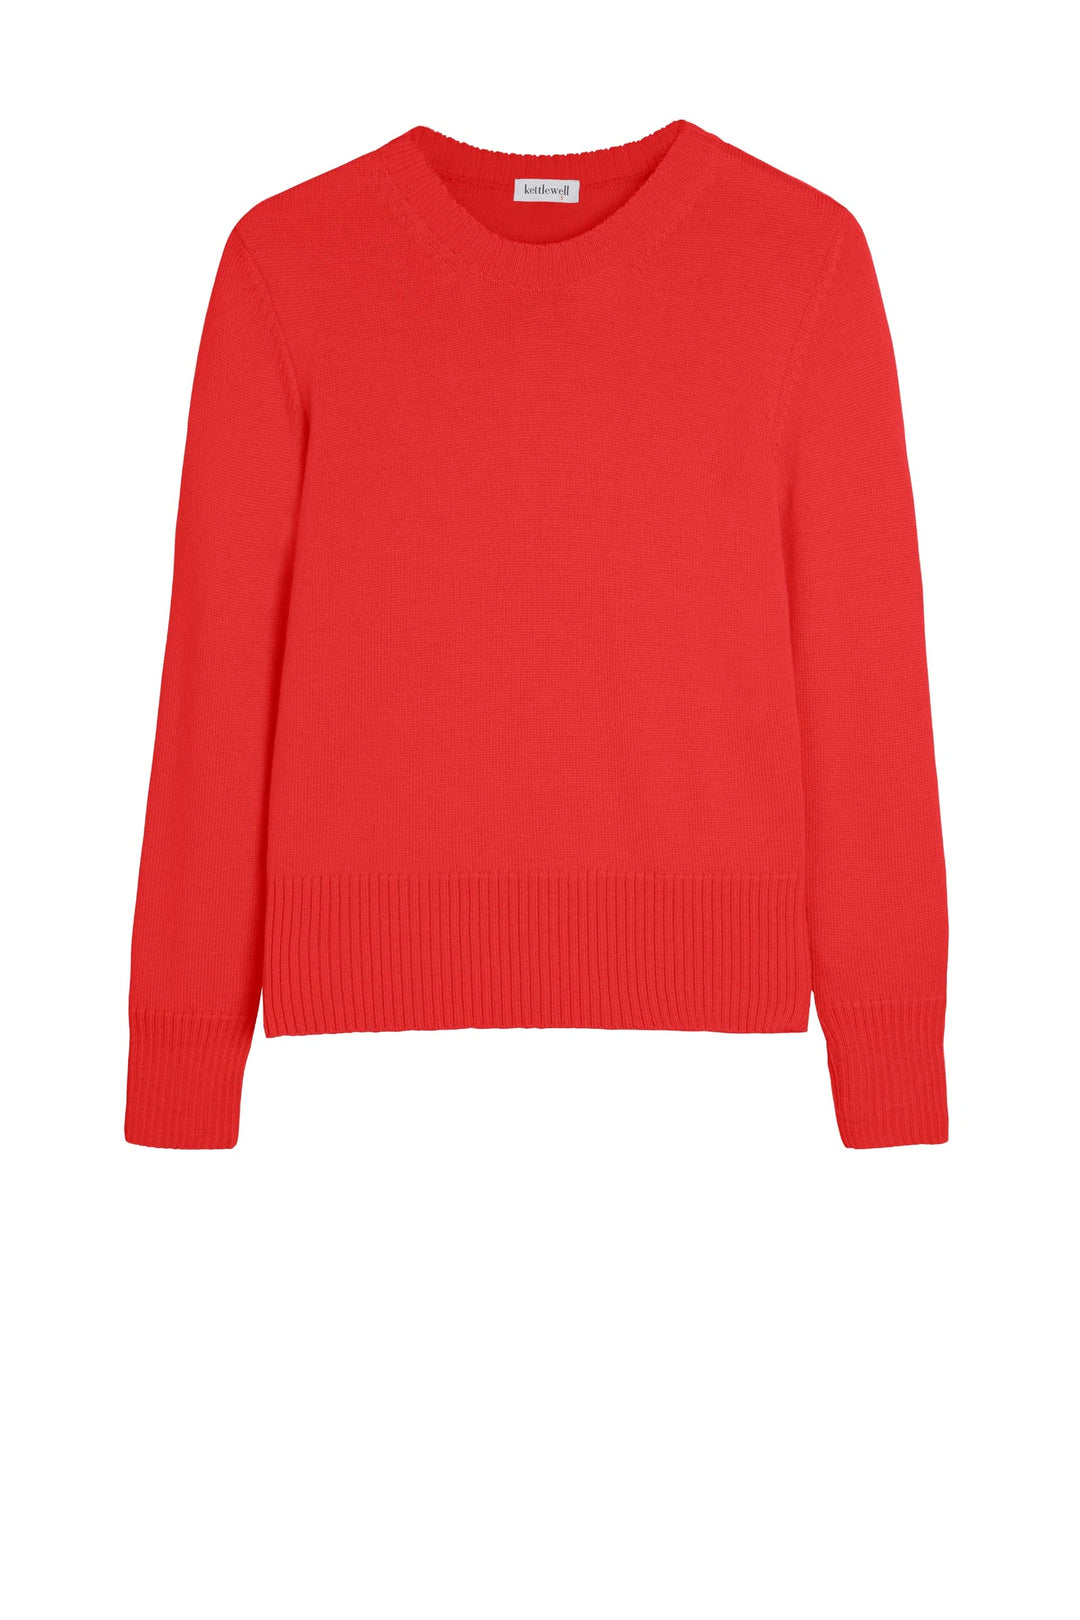 Kettlewell Connie Sweater - Coral Red (AU/SP)